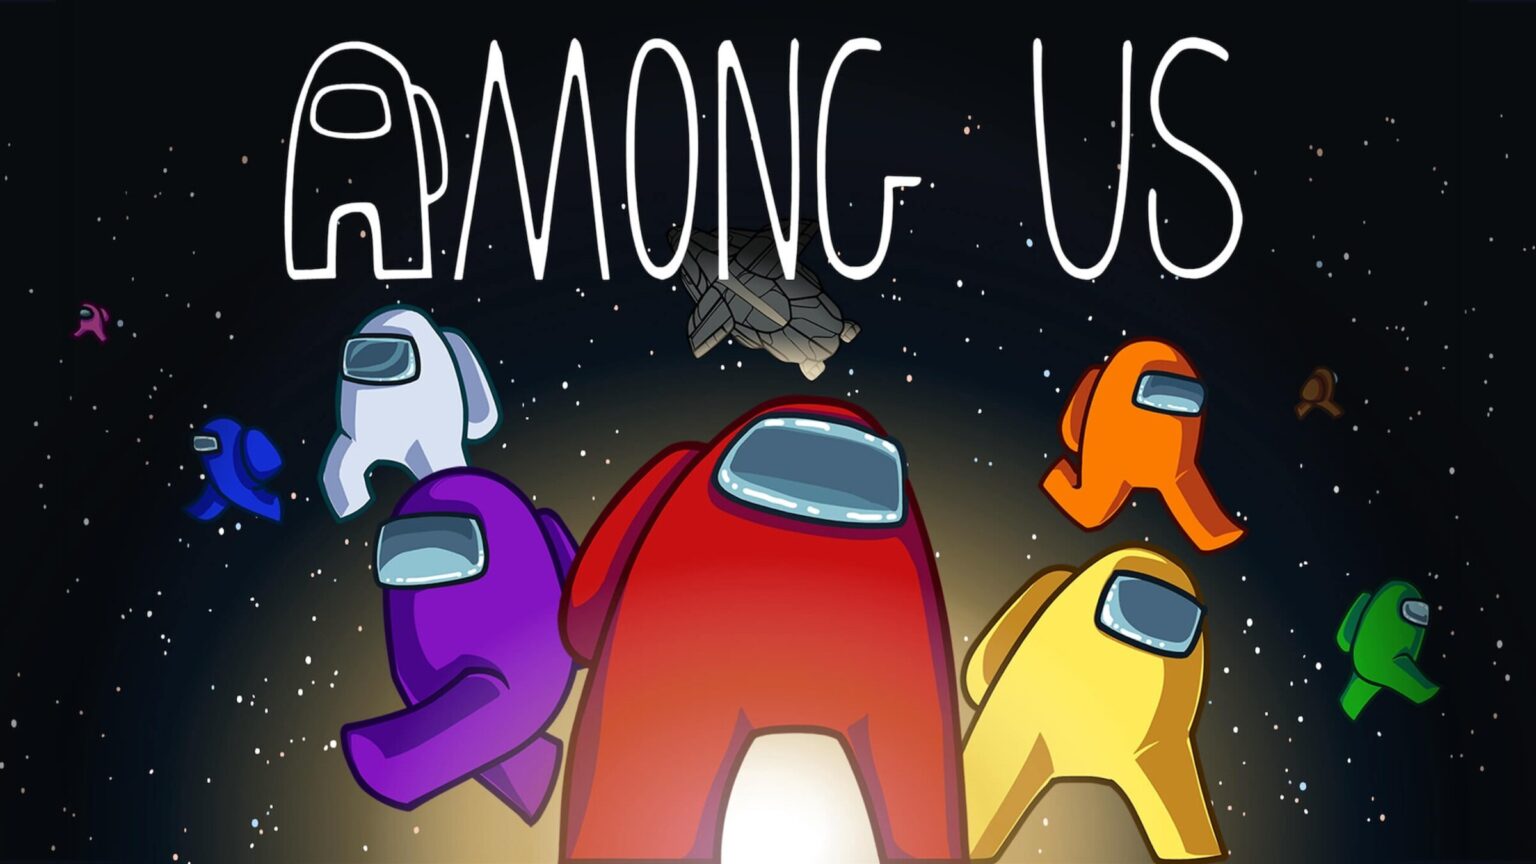 Is your favorite mobile game 'Among Us' finally available to play on your Xbox device? Find out all the devices 'Among Us' can be played on here.